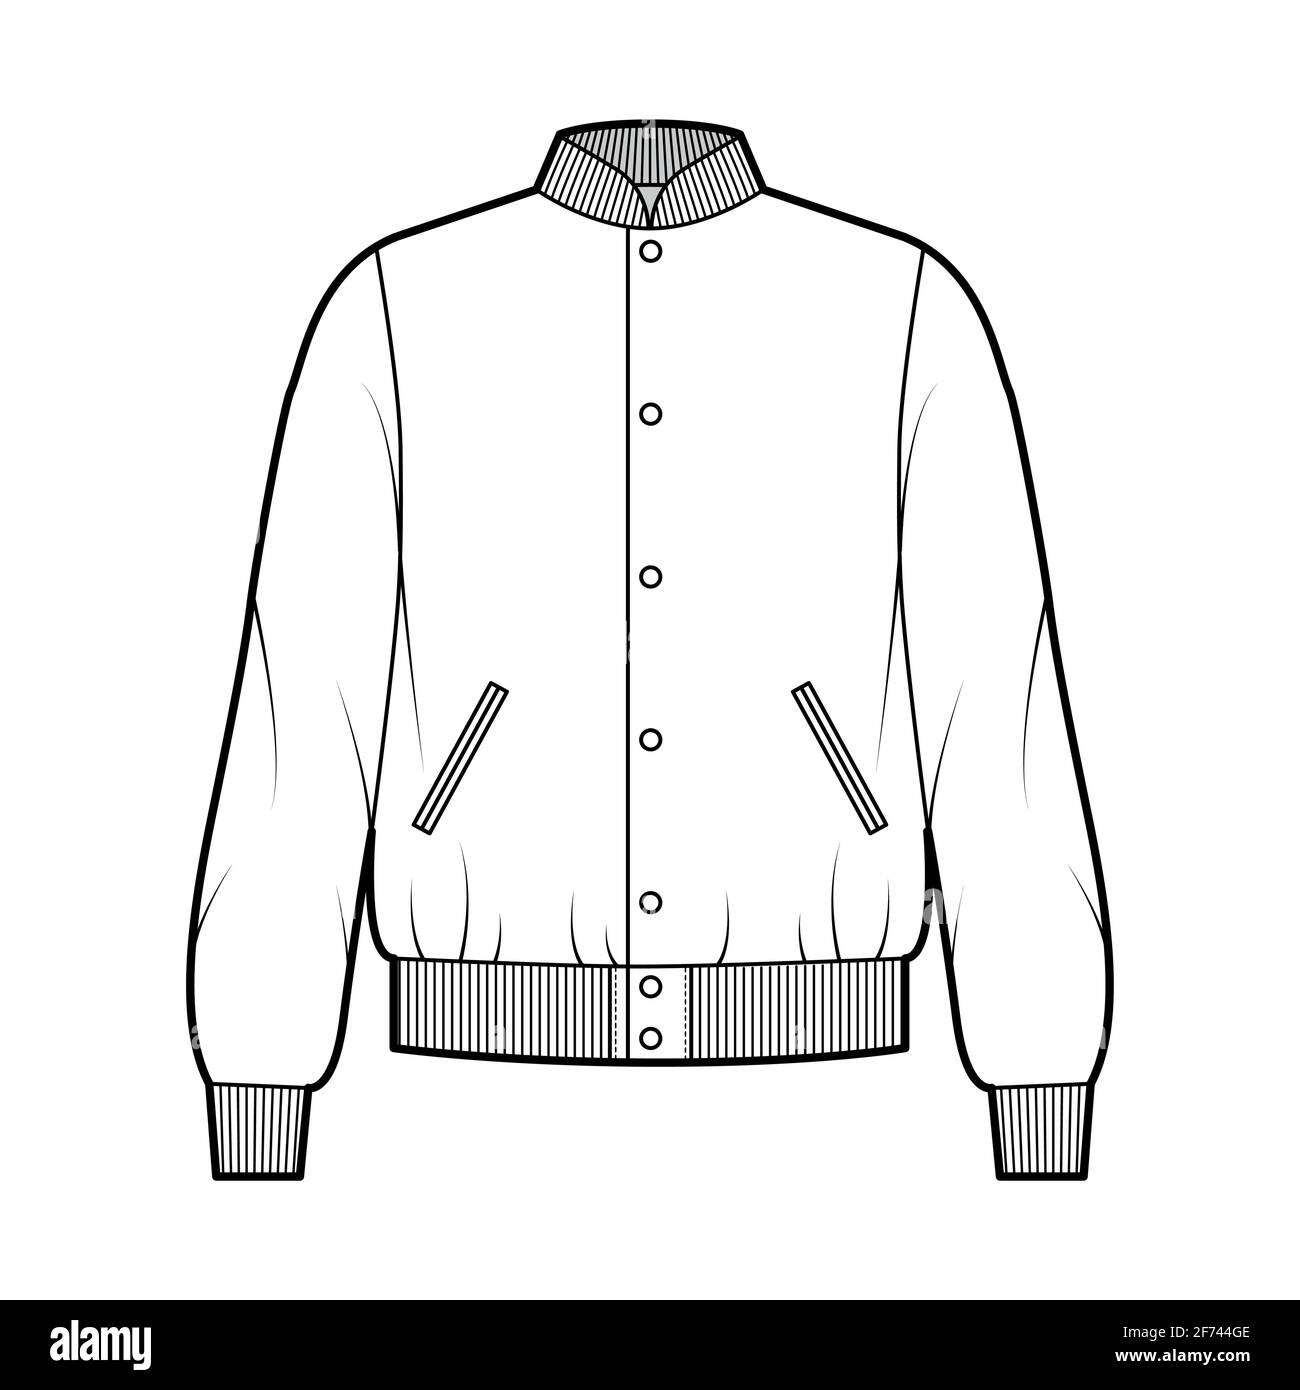 Varsity Bomber jacket technical fashion illustration with Rib baseball collar, cuffs, jetted pockets, buttons fastening, long sleeves. Flat coat template front, white color. Women men unisex top CAD Stock Vector